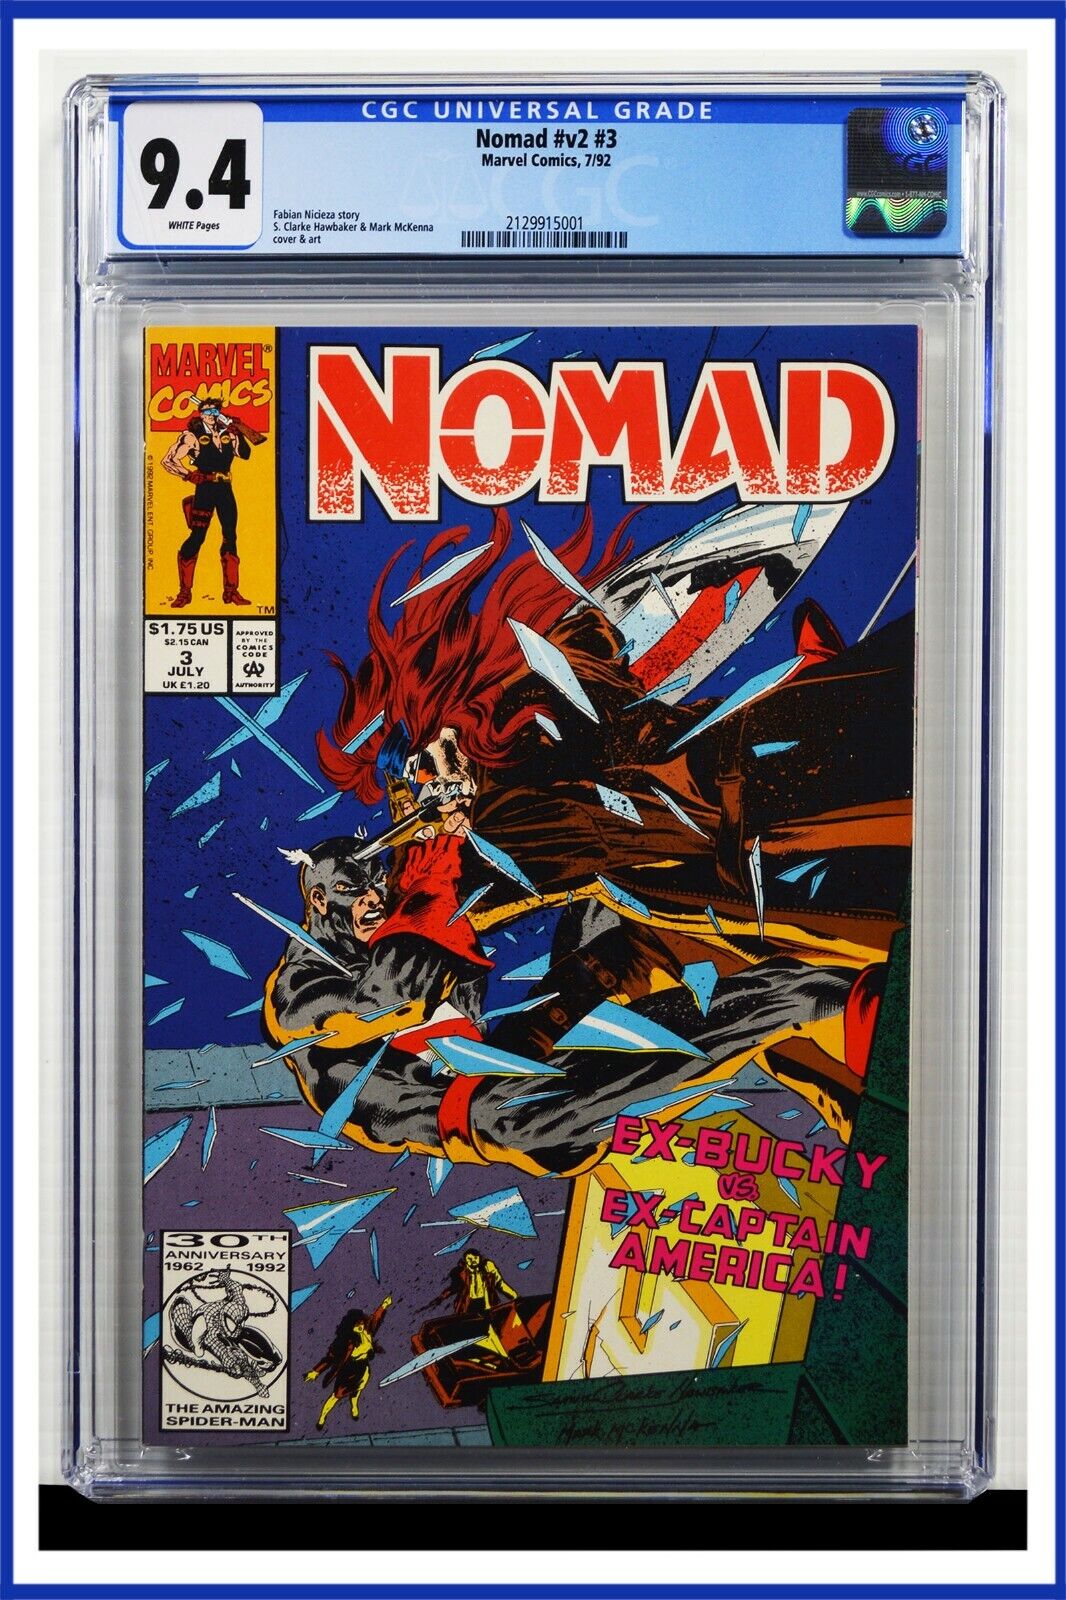 Nomad #v2 #3 CGC Graded 9.4 Marvel July 1992 White Pages Comic Book